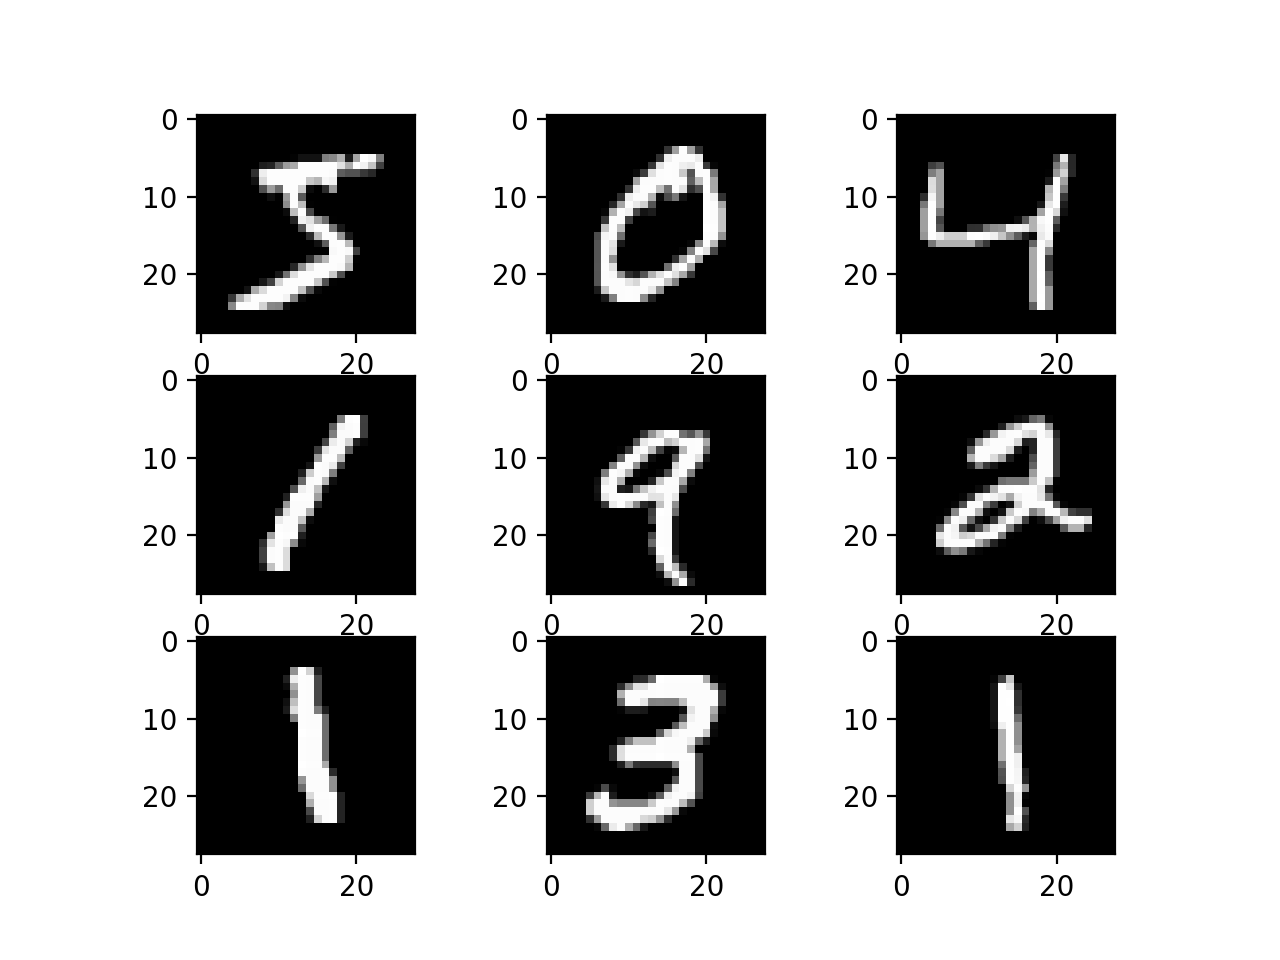 How to Develop a CNN for MNIST Handwritten Digit Classification - MachineLearningMastery.com